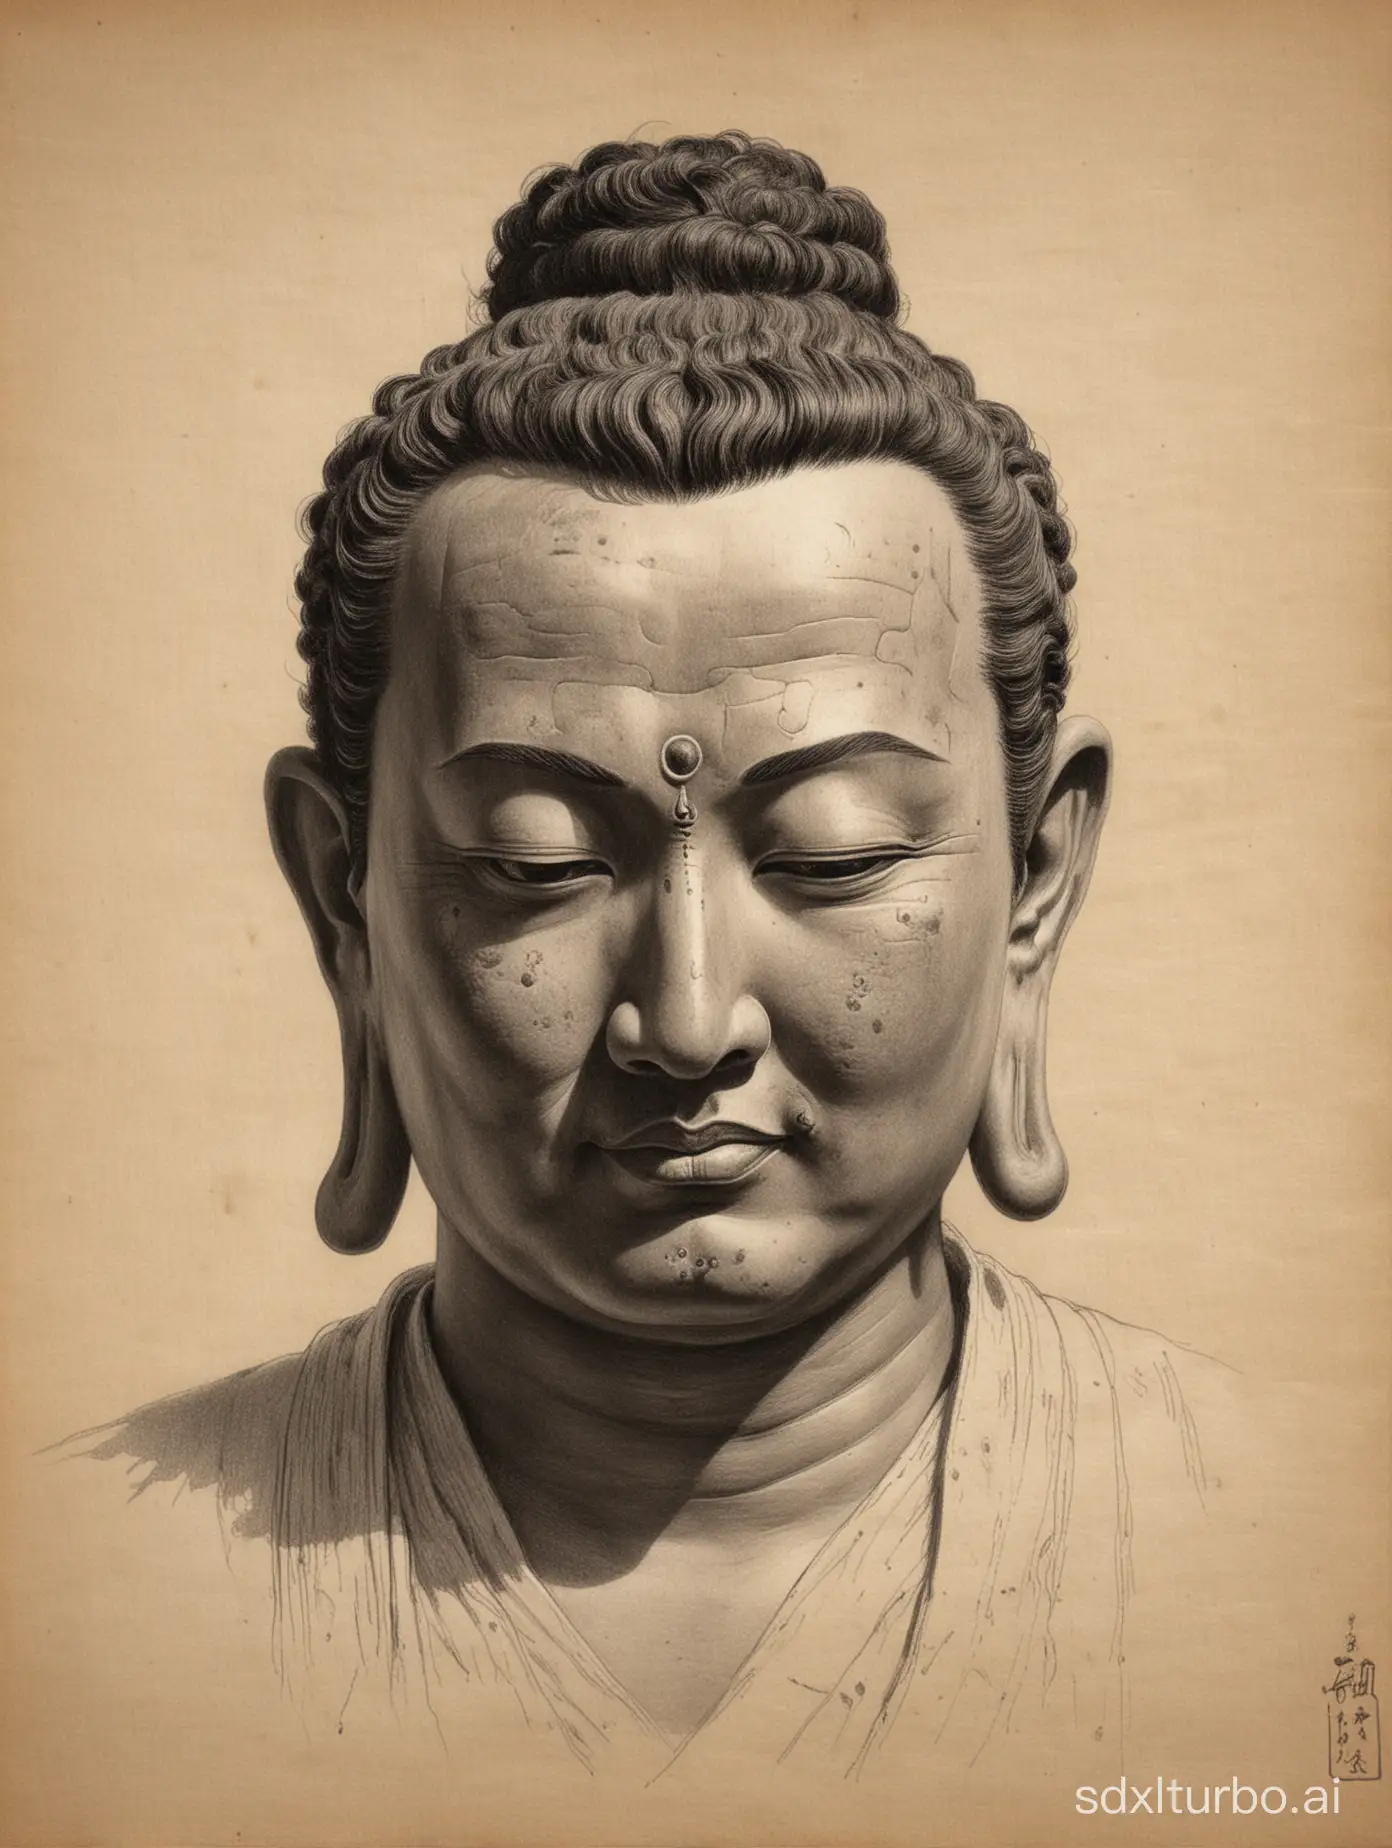 Pencil sketch of Ancient Chinese handsome Buddha,Head sketch by Ilya Repin,Proud, sinister, evil,Big earlobes, Buddha, who looks like a Buddha,Keep eyes open,big back, Qiyi hair,on handmade paper,Martial arts themes,Jin Yong's world view,monochrome,